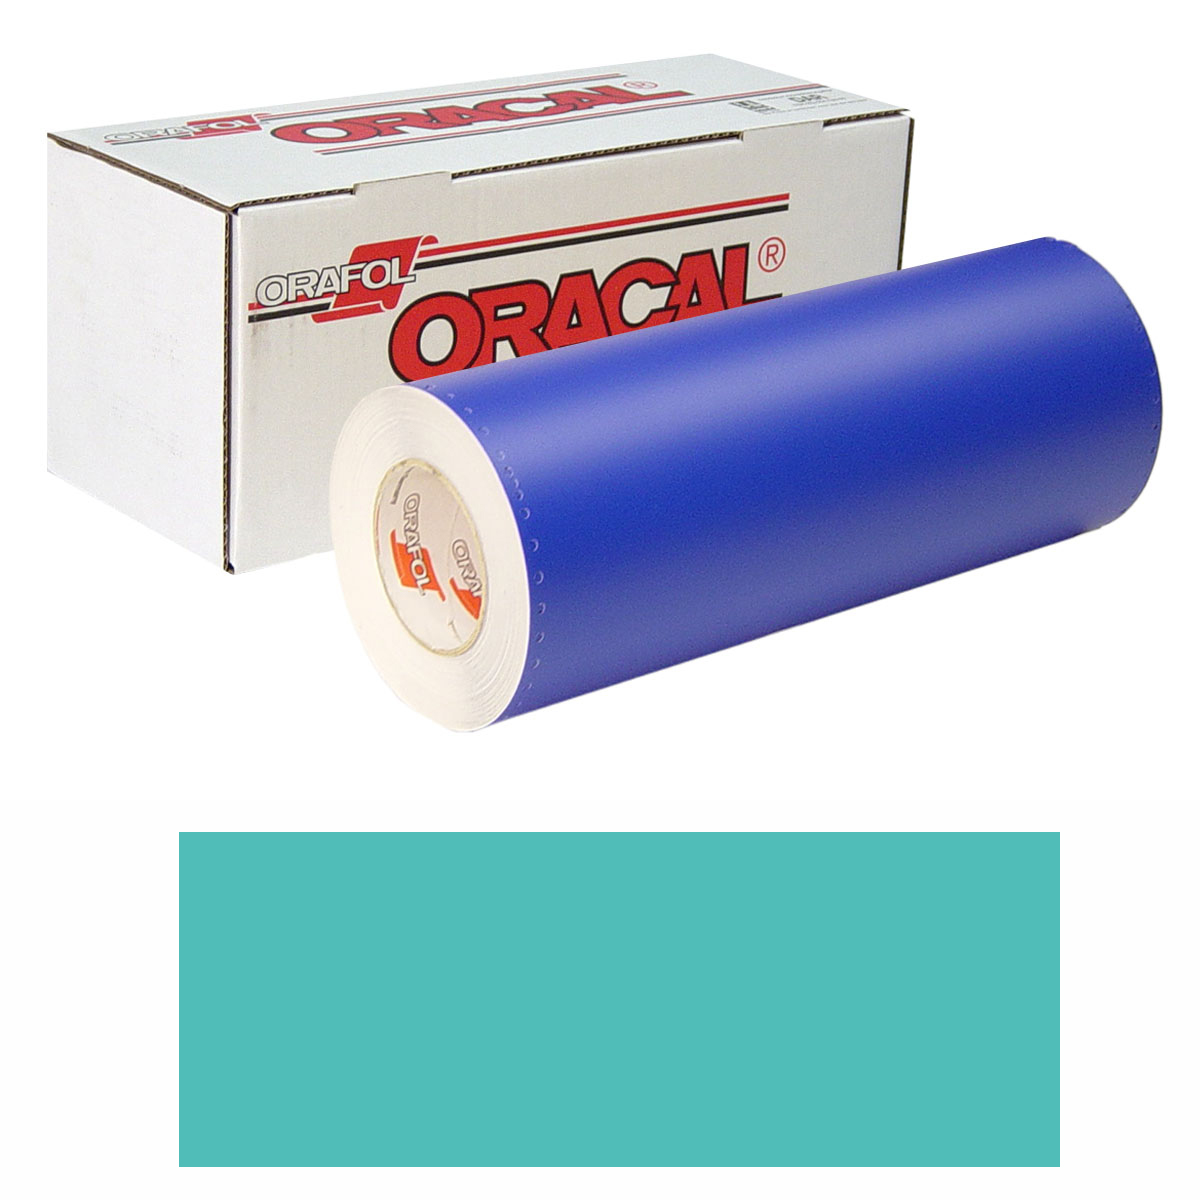 ORACAL 8300 30in X 10yd 054 Turquoise